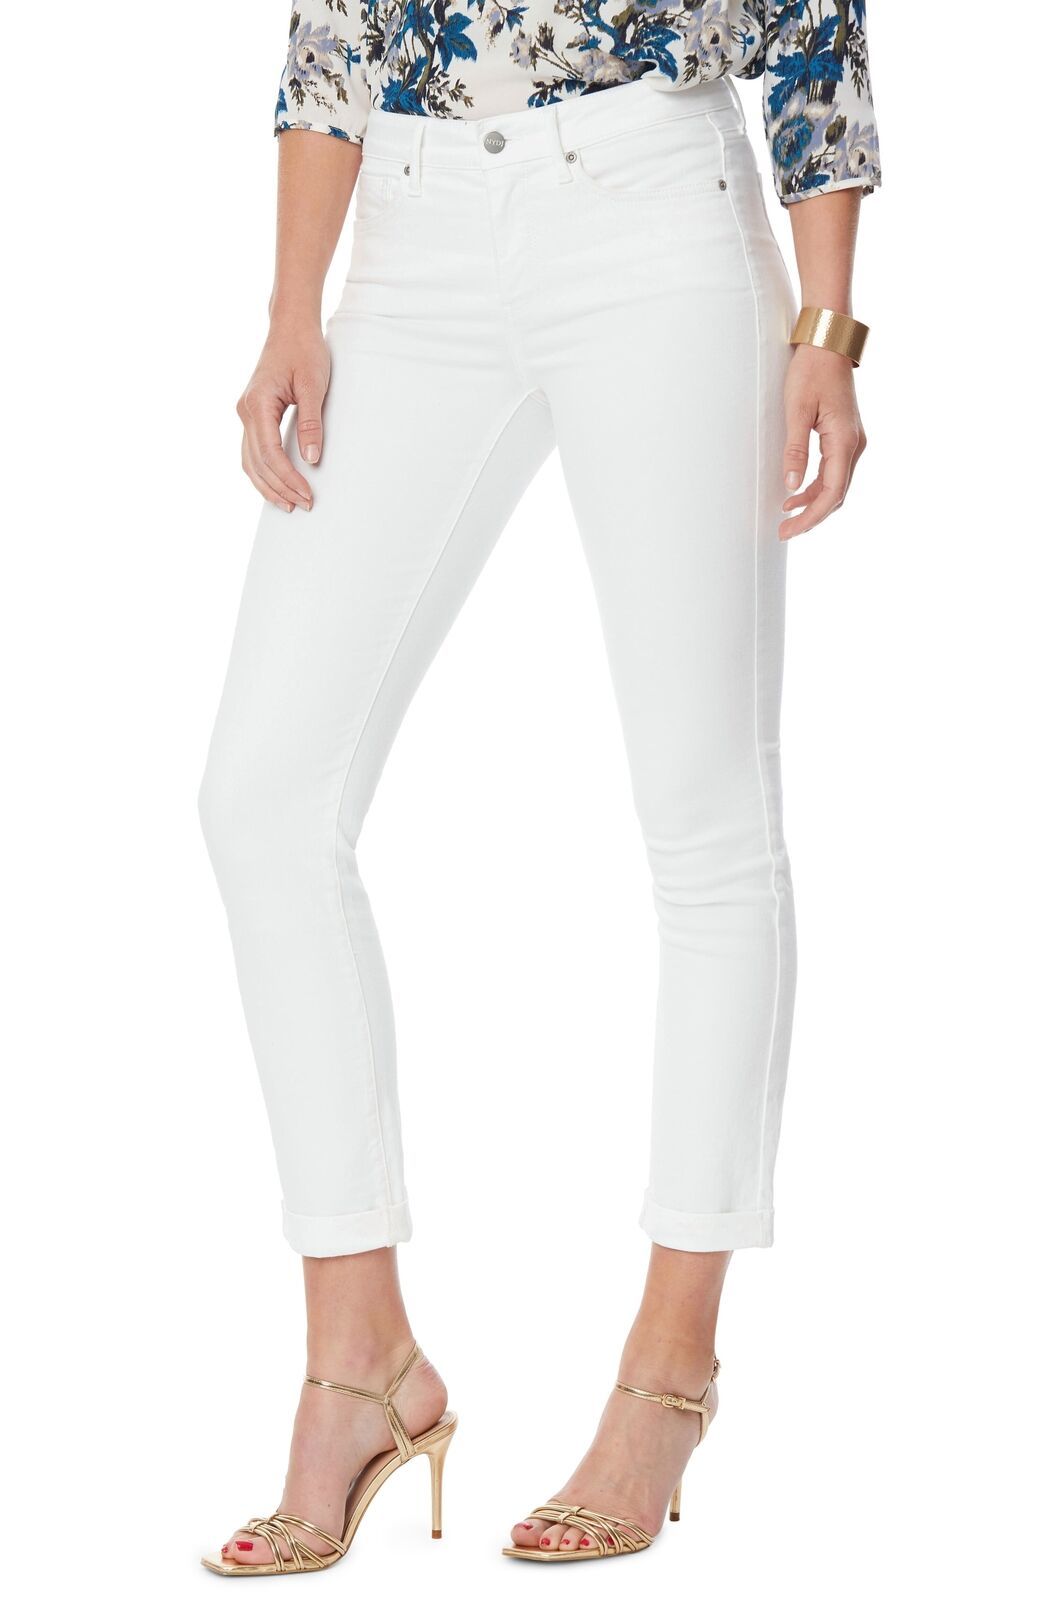 NYDJ OPTIC WHITE Women's Sheri Slim Ankle Jeans with Roll Cuff, US 14